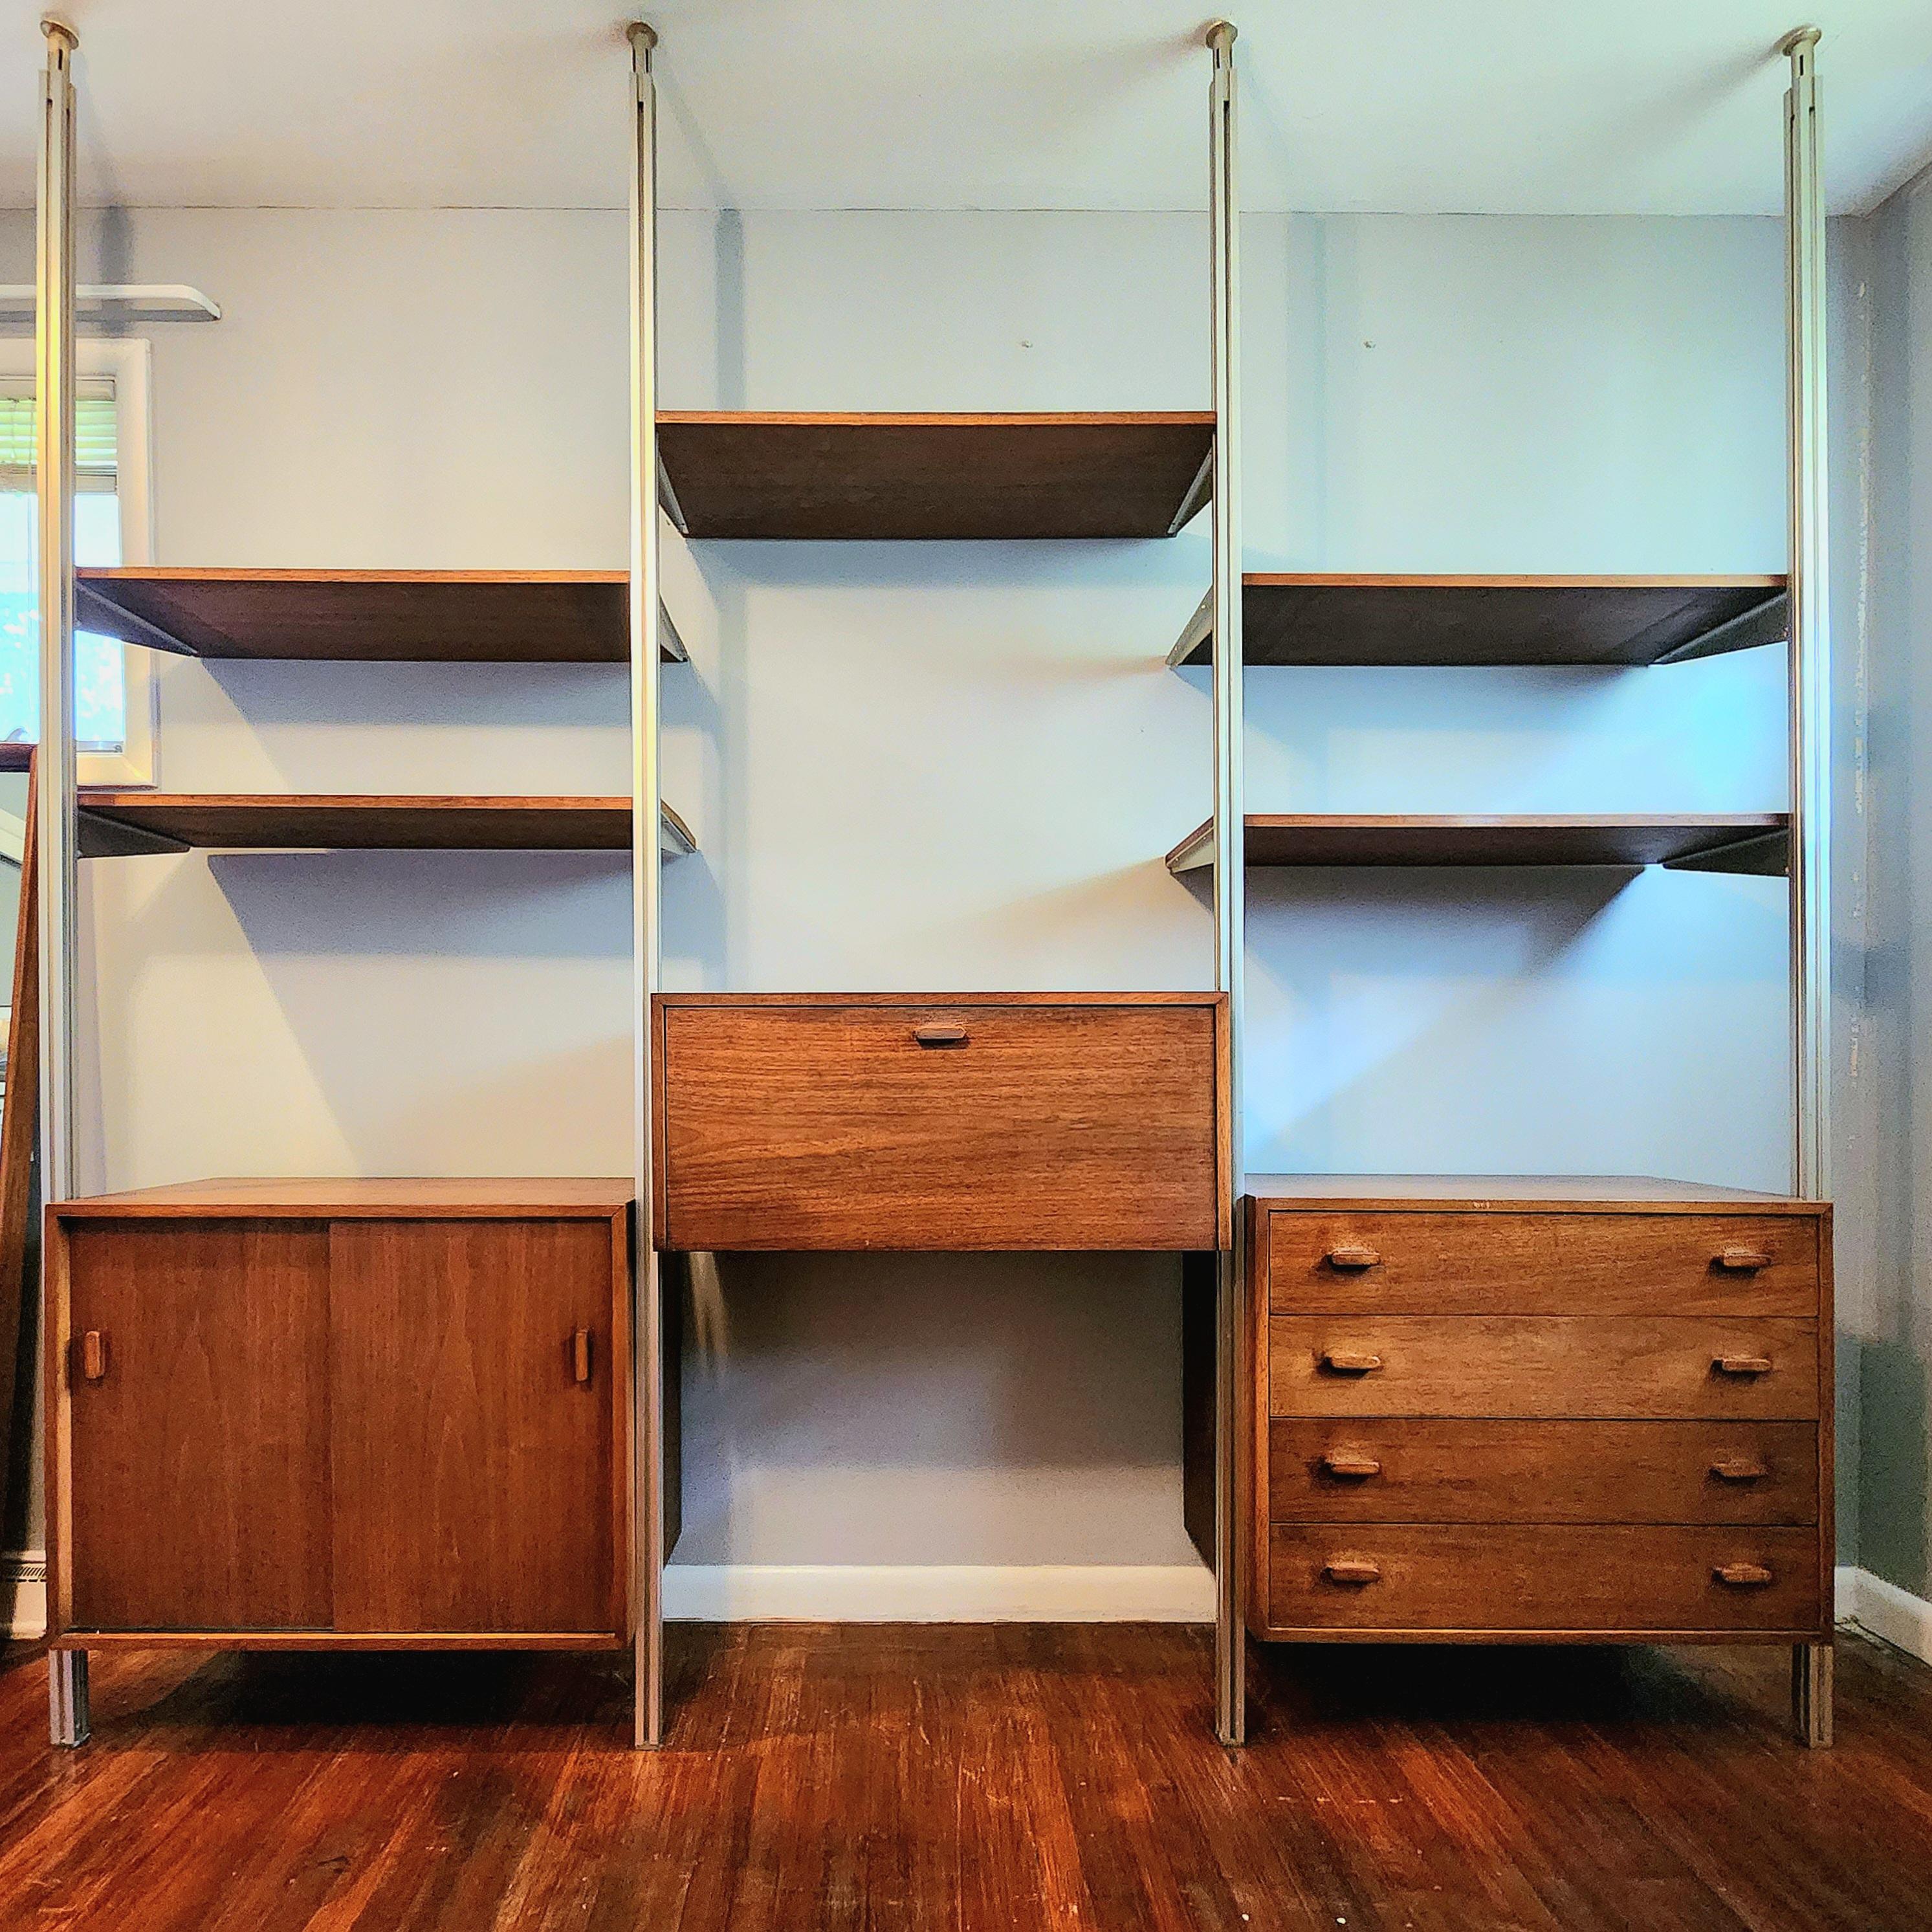 Beautiful 3 bay Omni wall unit by goerge nelson. walnut with floor to ceiling aluminum uprights.

